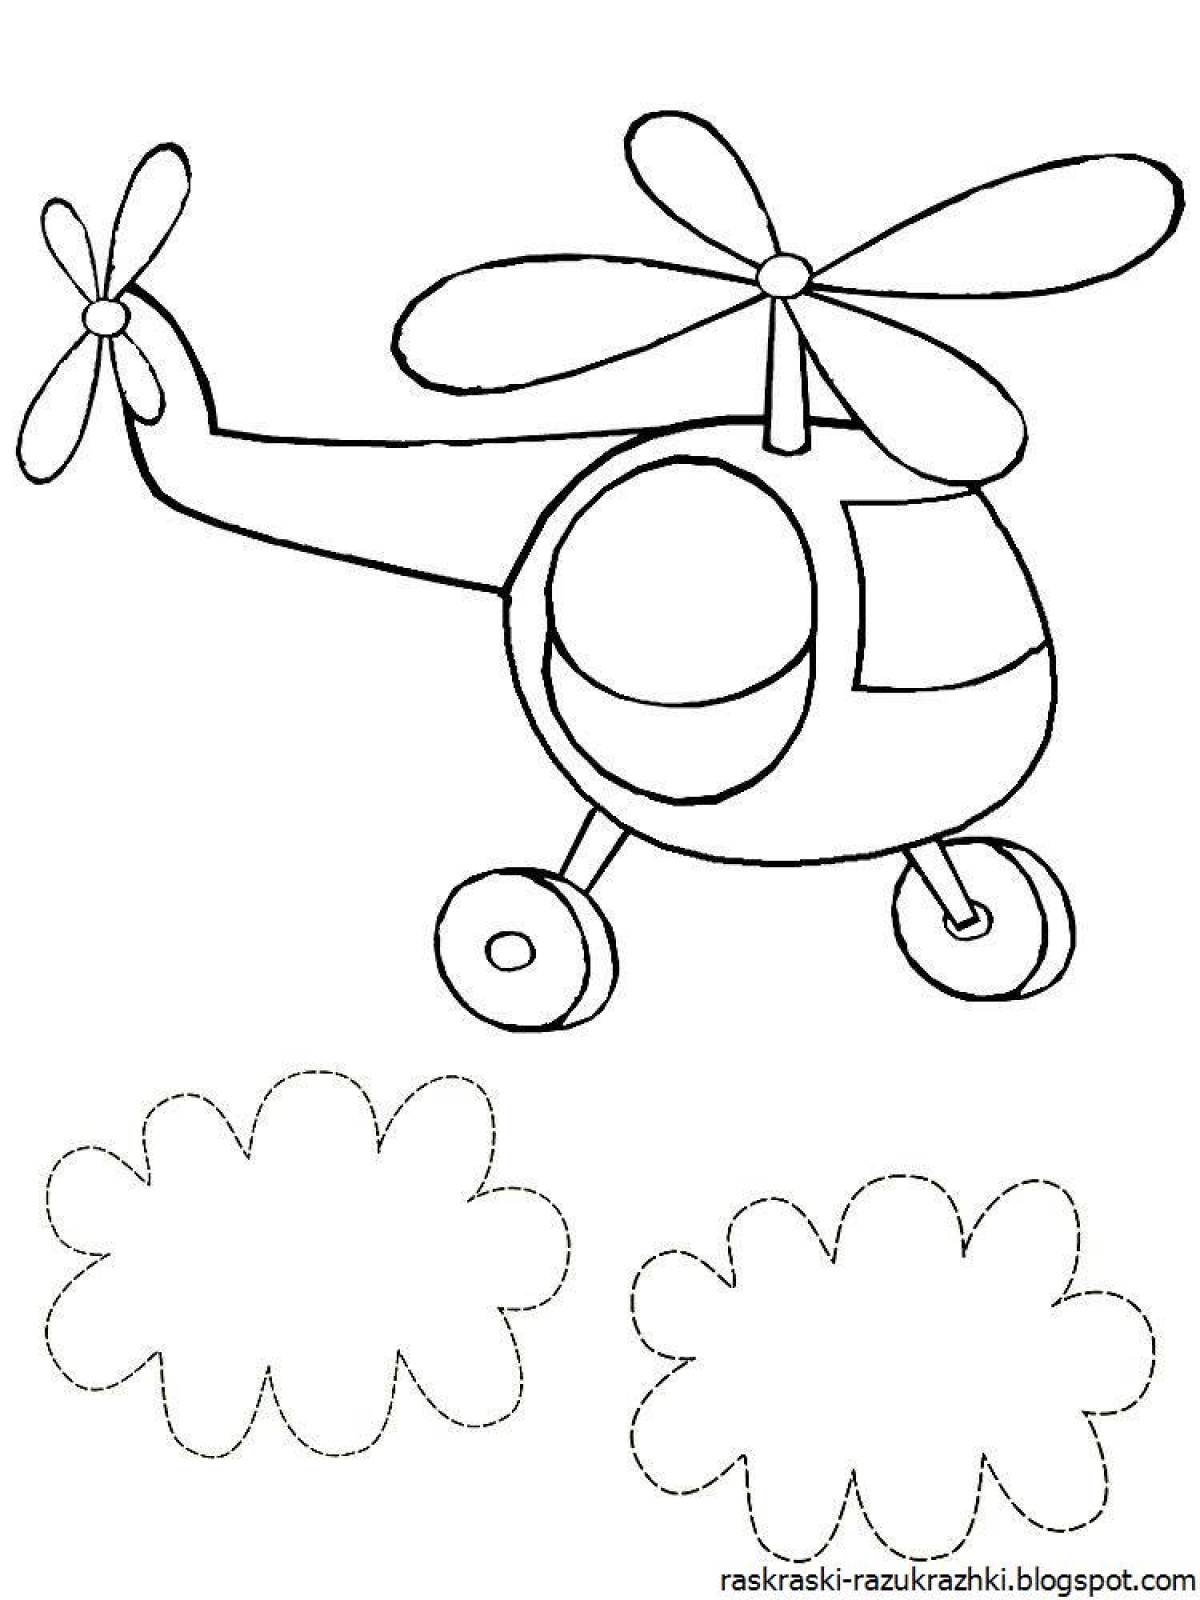 Adorable helicopter coloring book for kids